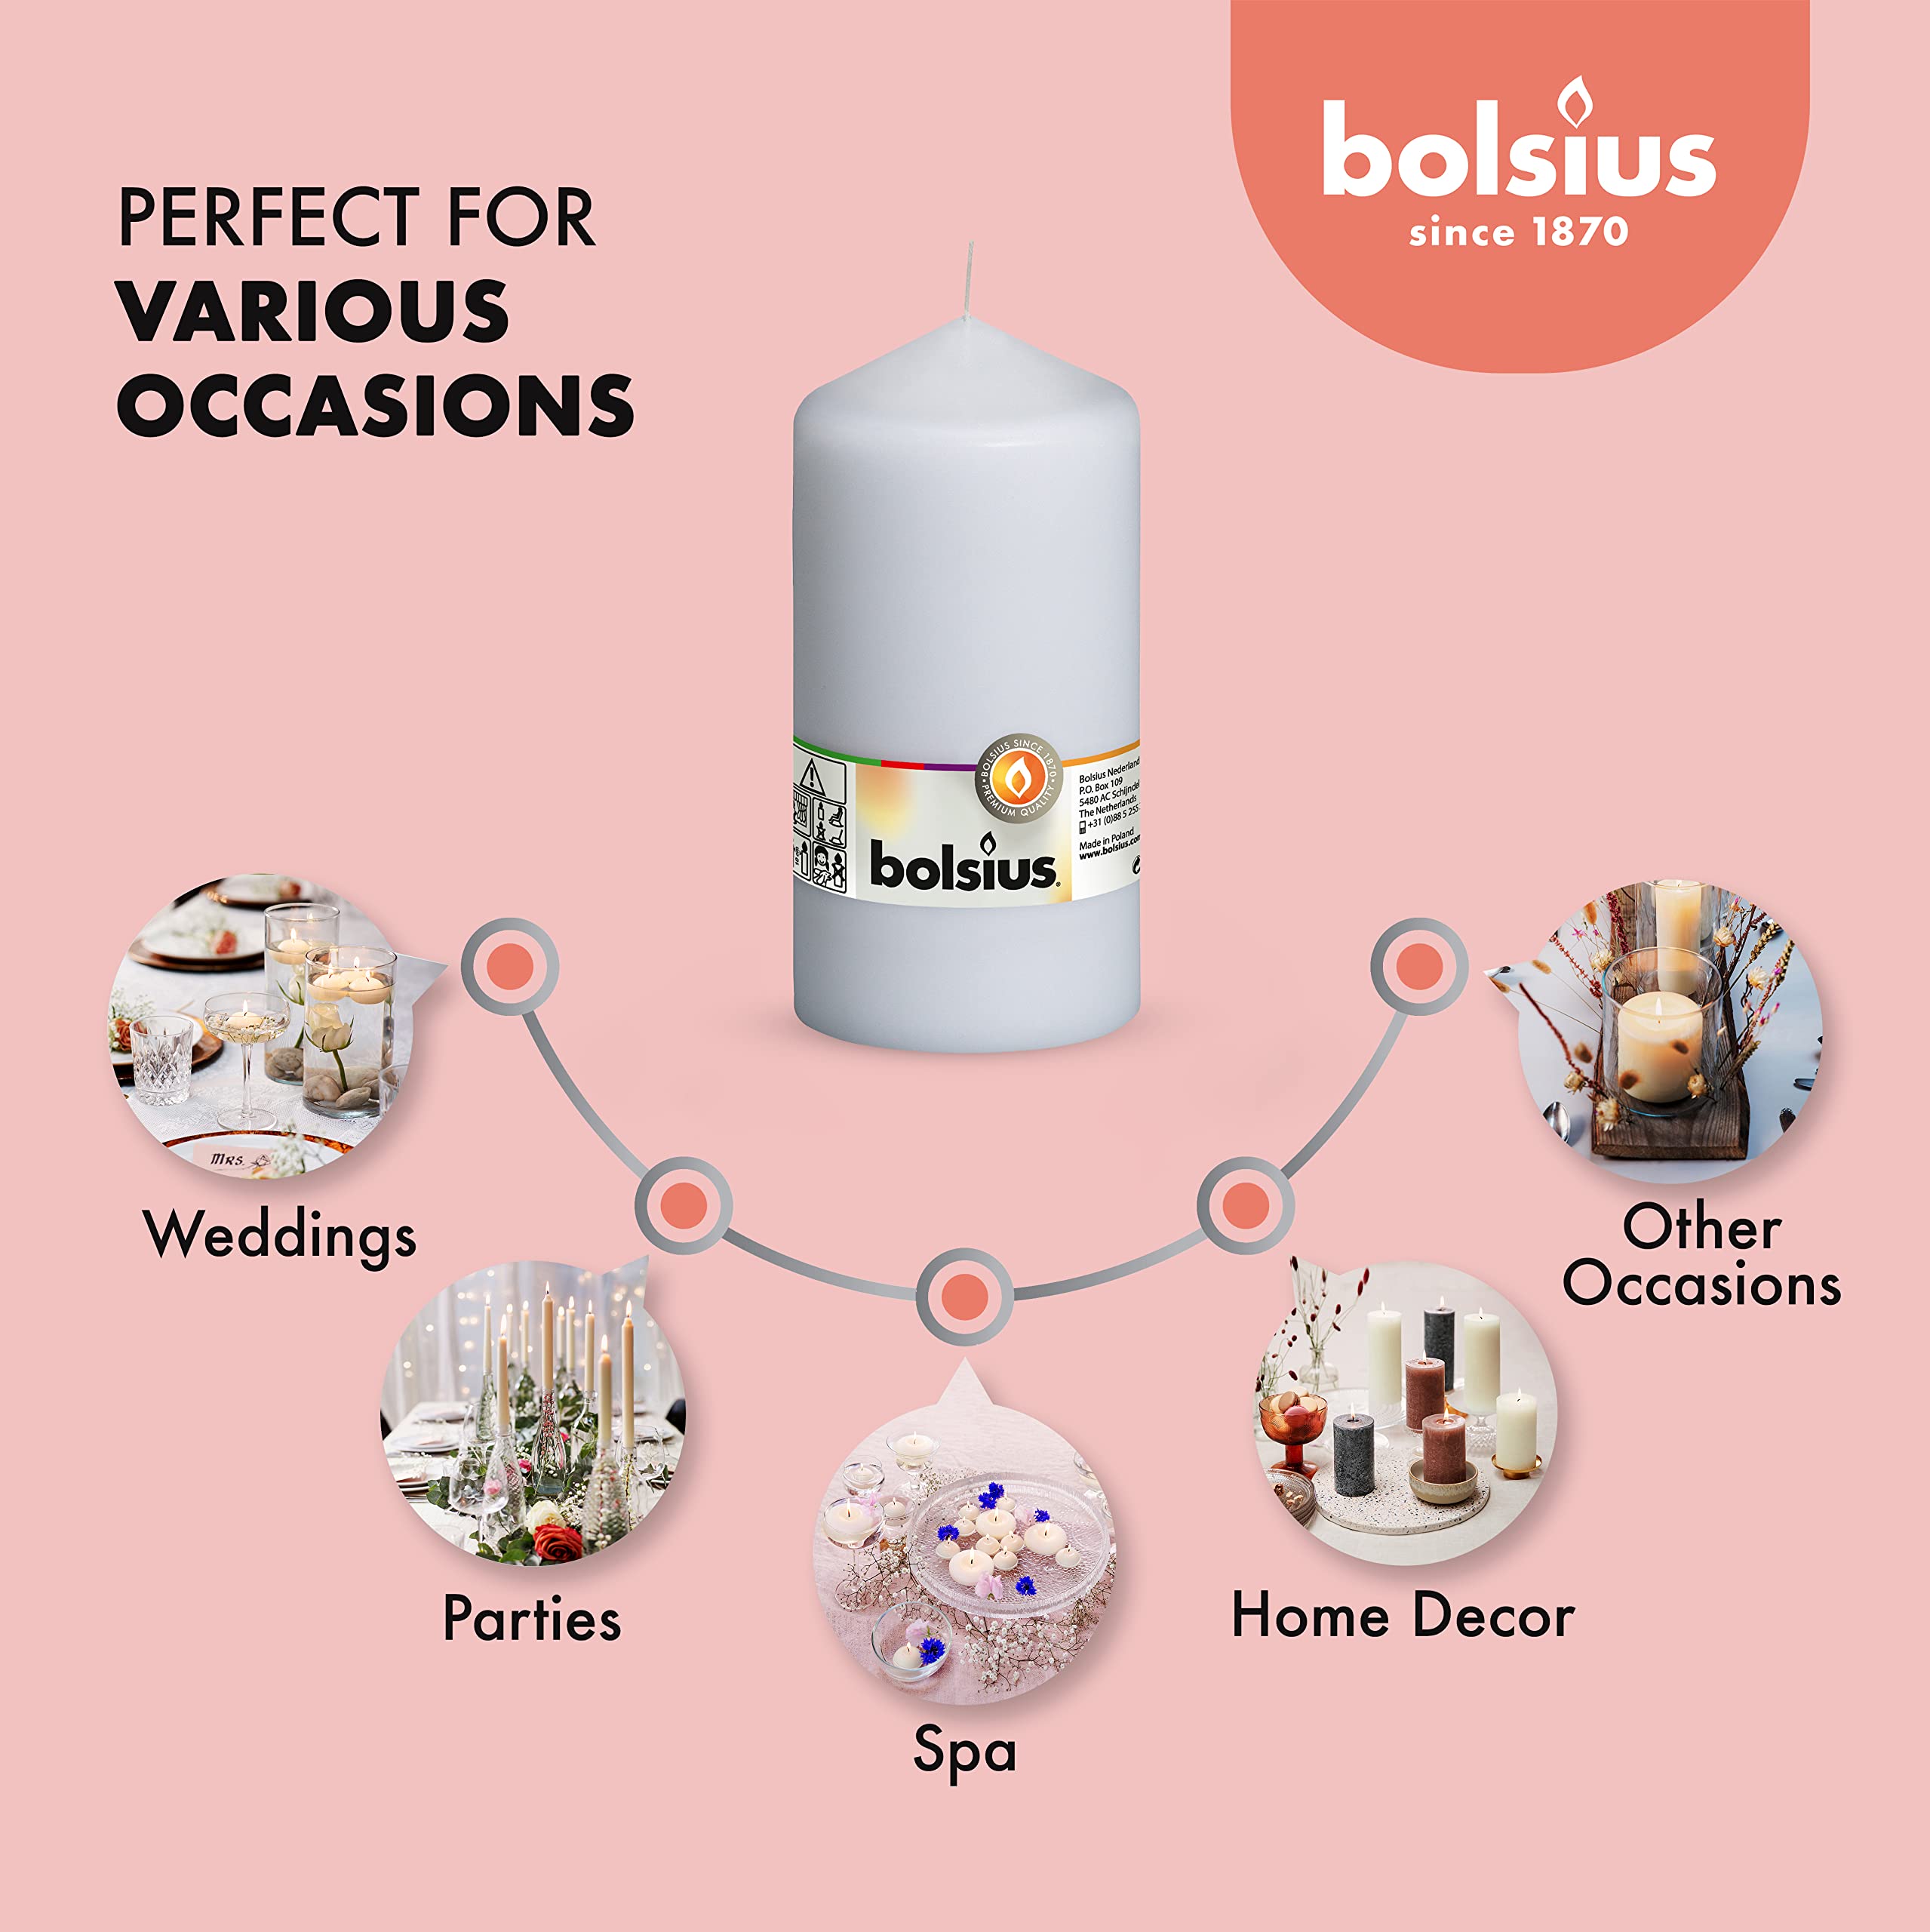 BOLSIUS Pillar Candles - Premium European Quality - Unscented Dinner, Wedding, Party, & Restaurant Candles  - Like New